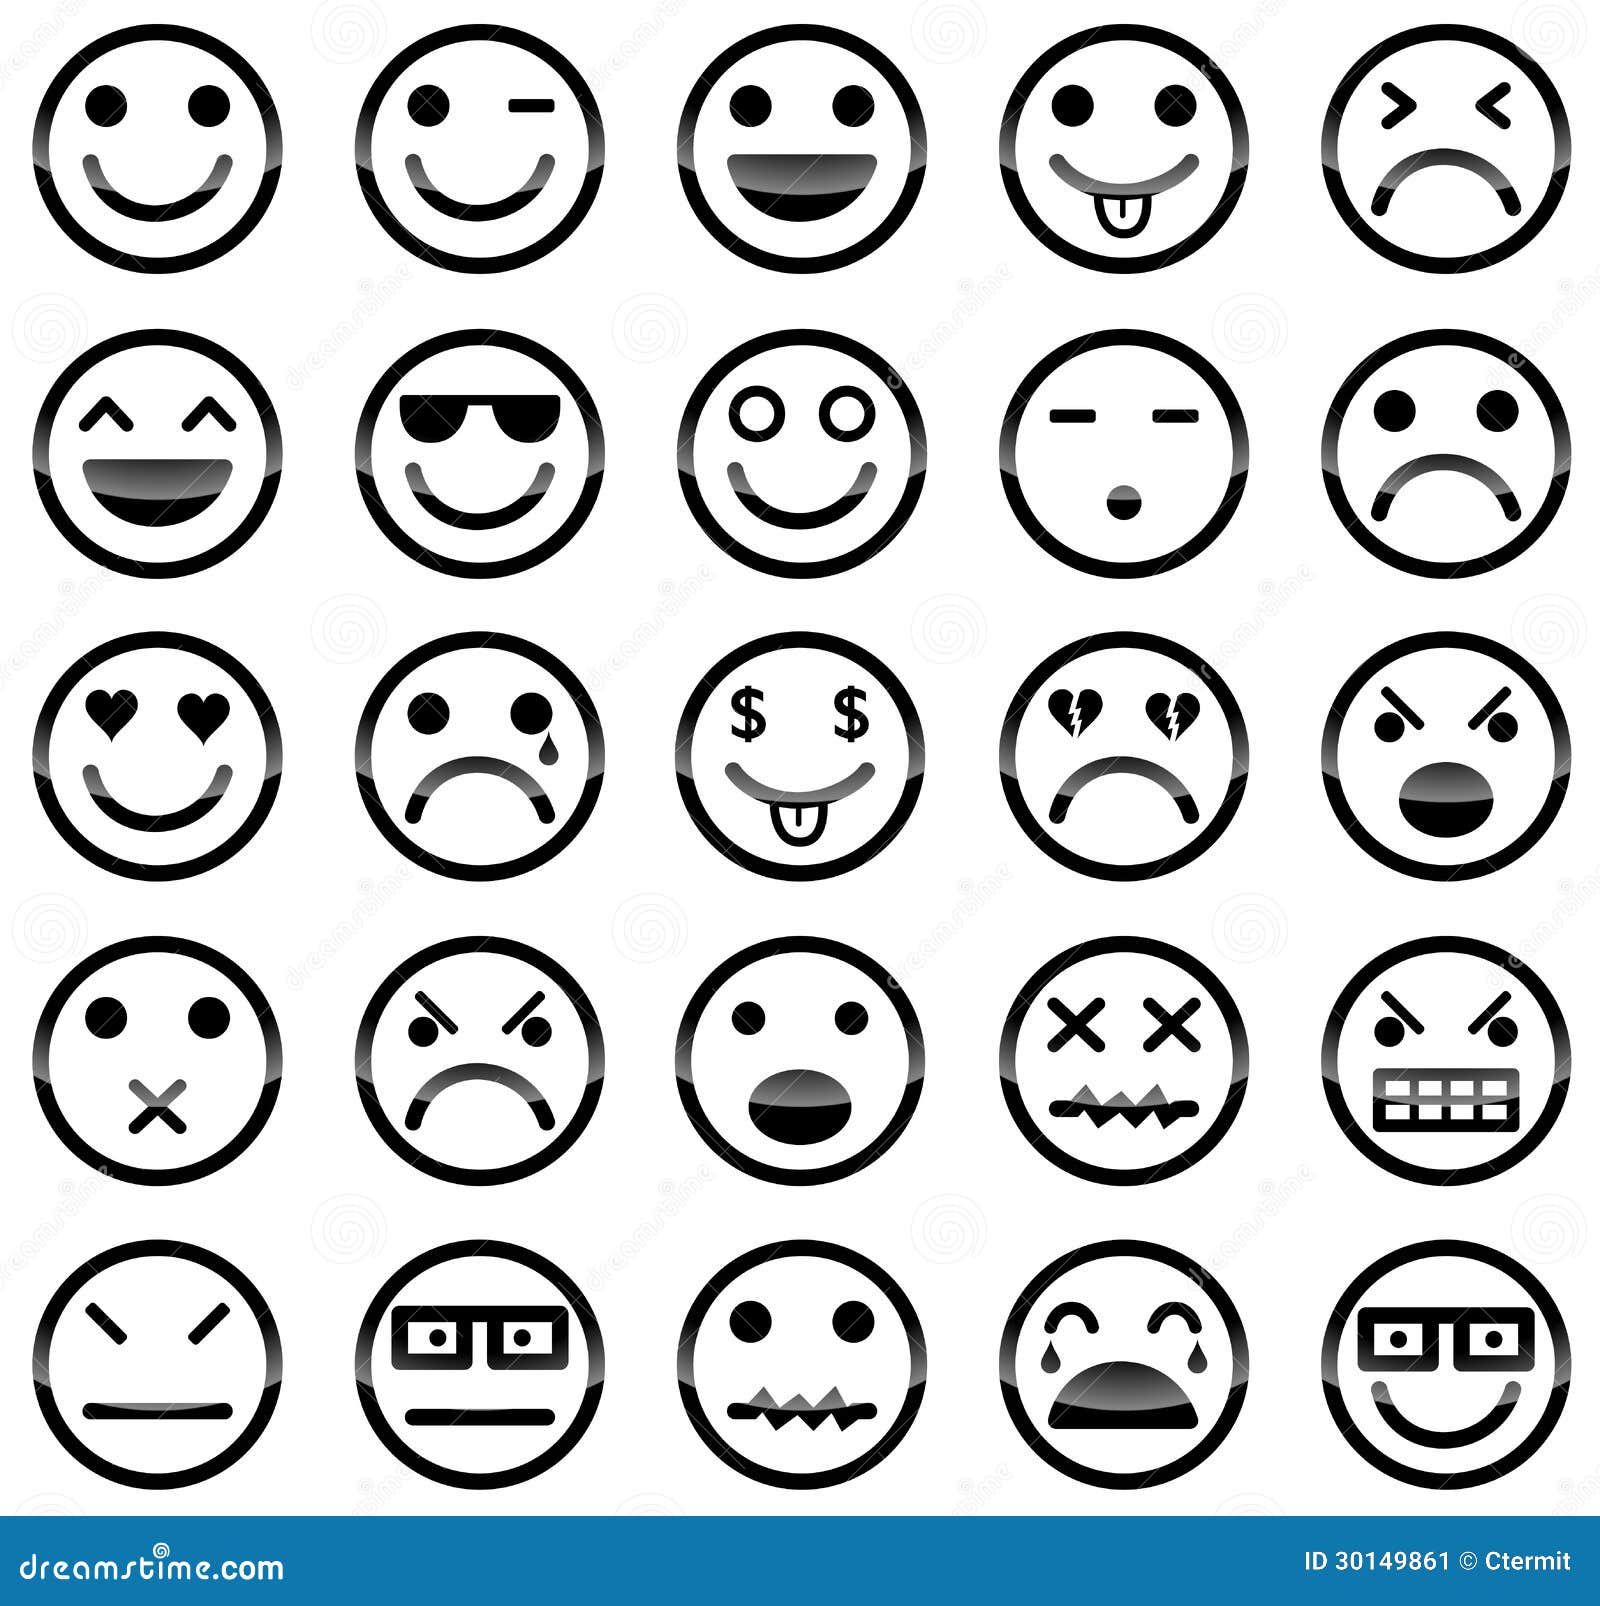 smiley icons